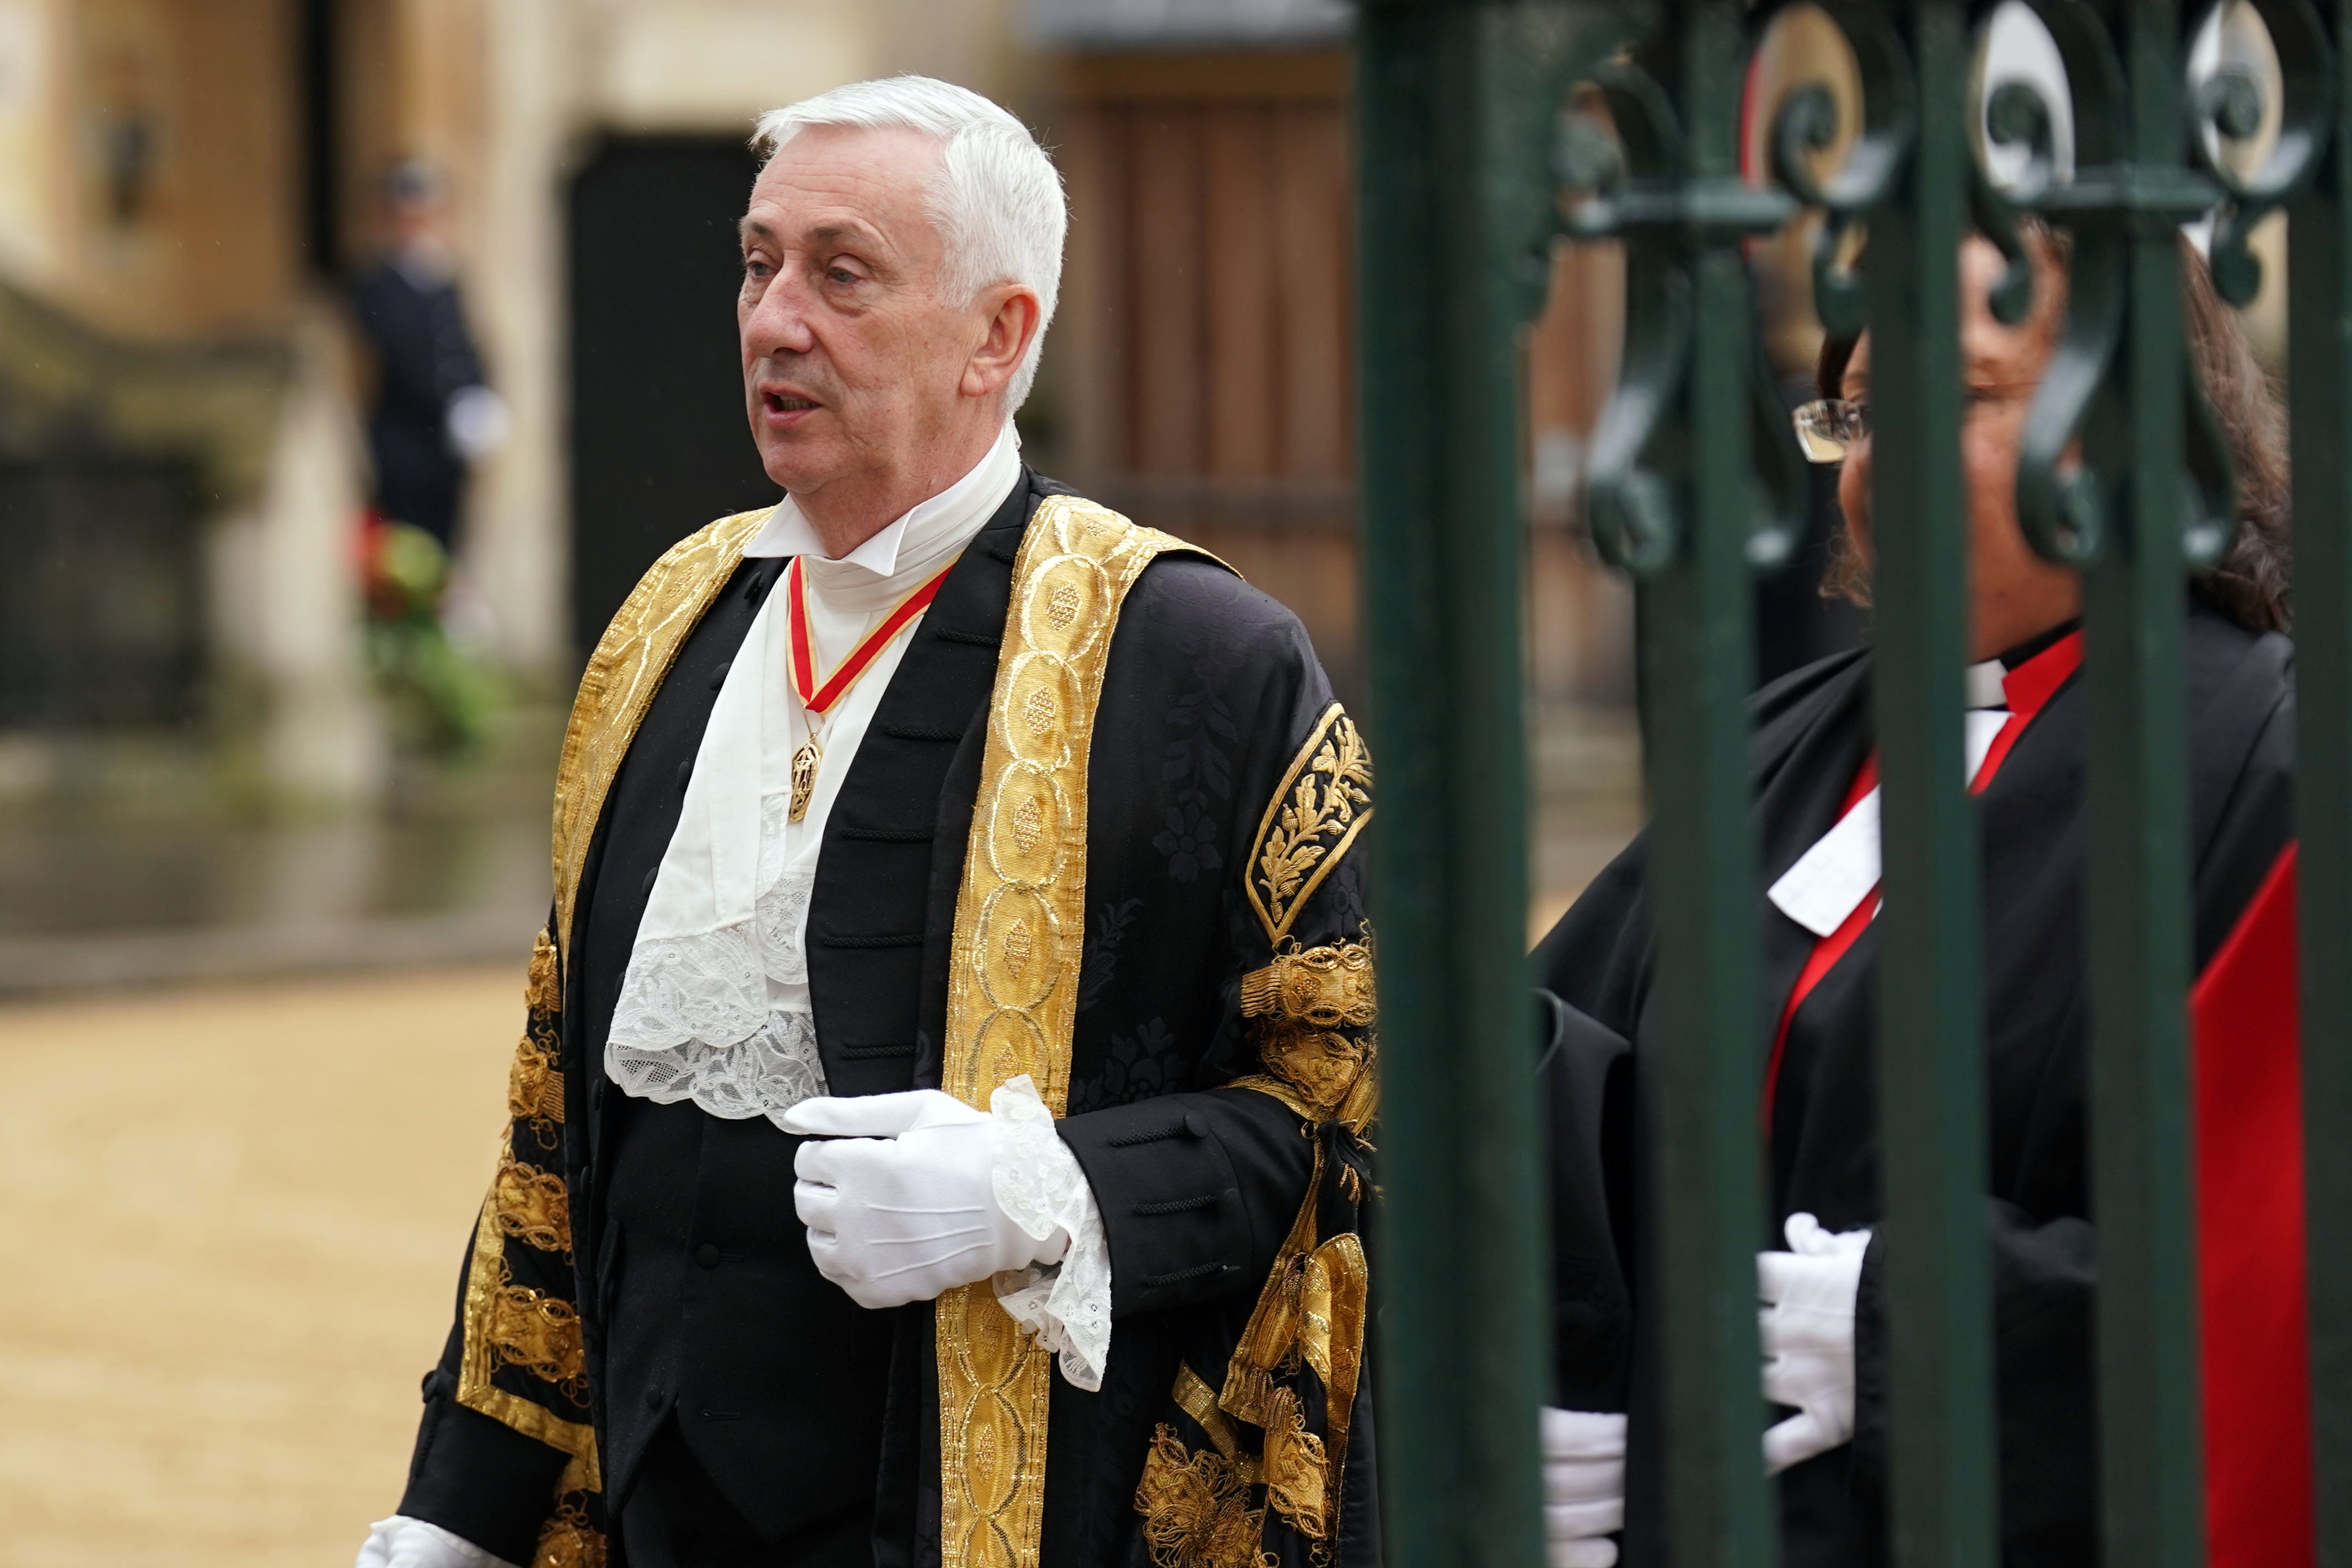 Sir Lindsay Hoyle continues to face calls to resign, although momentum behind William Wragg’s confidence motion appears to have slowed (Andrew Milligan/PA)